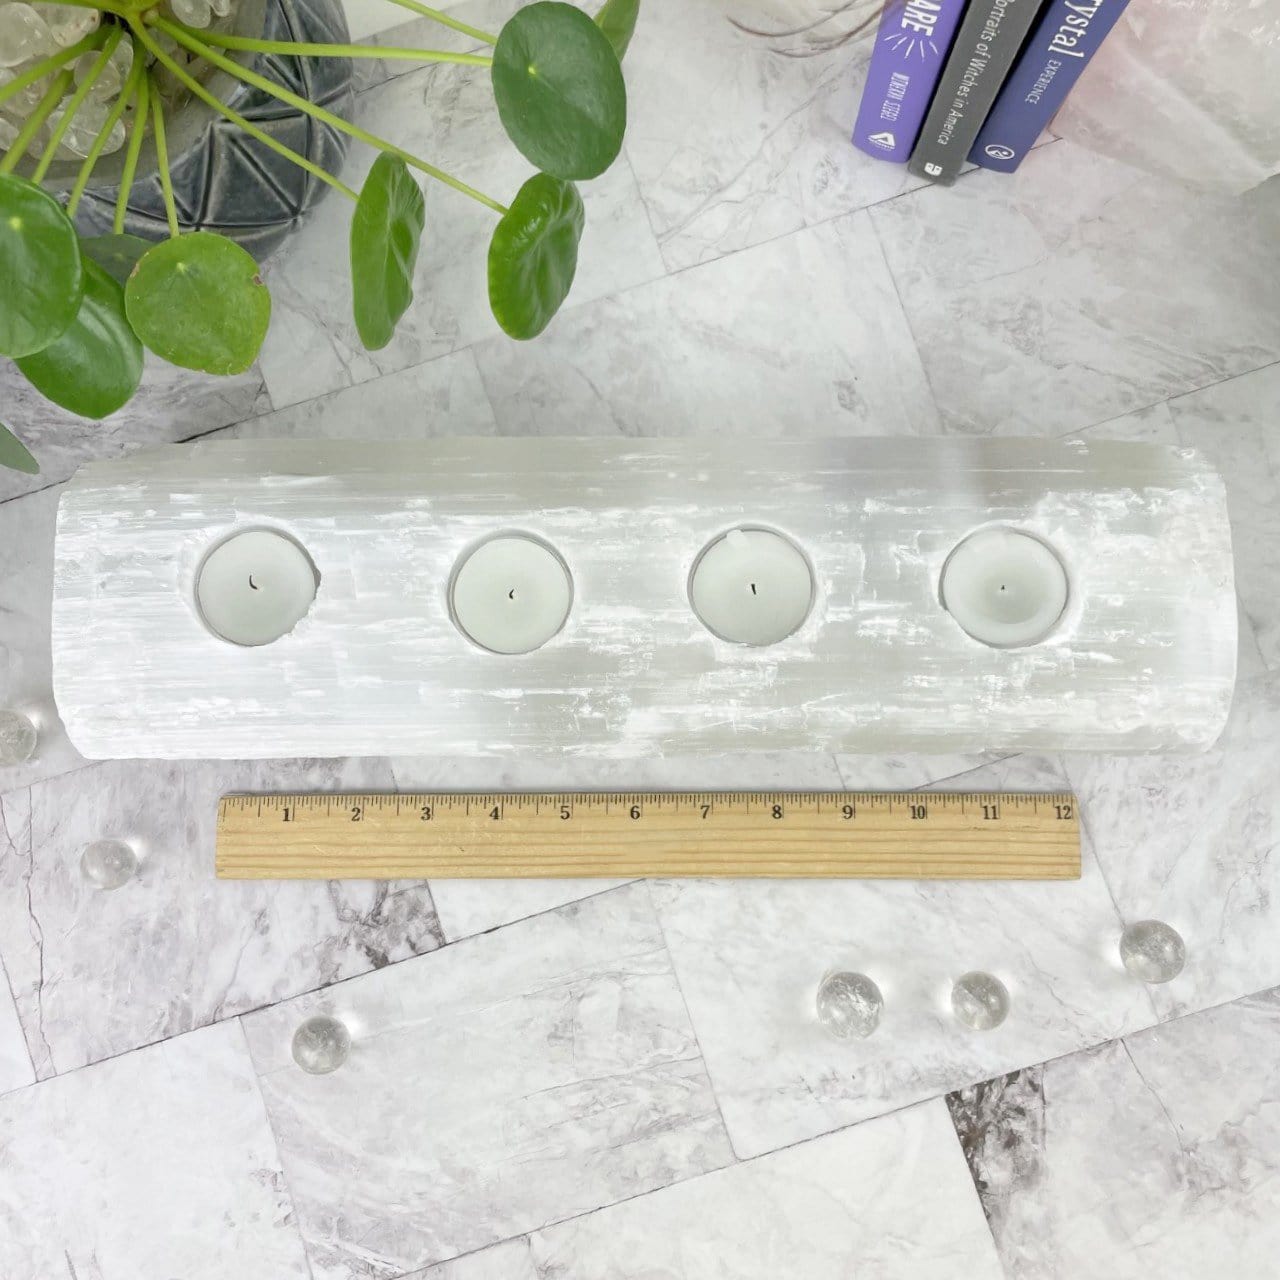 4 votive selenite candle holder with ruler for size reference